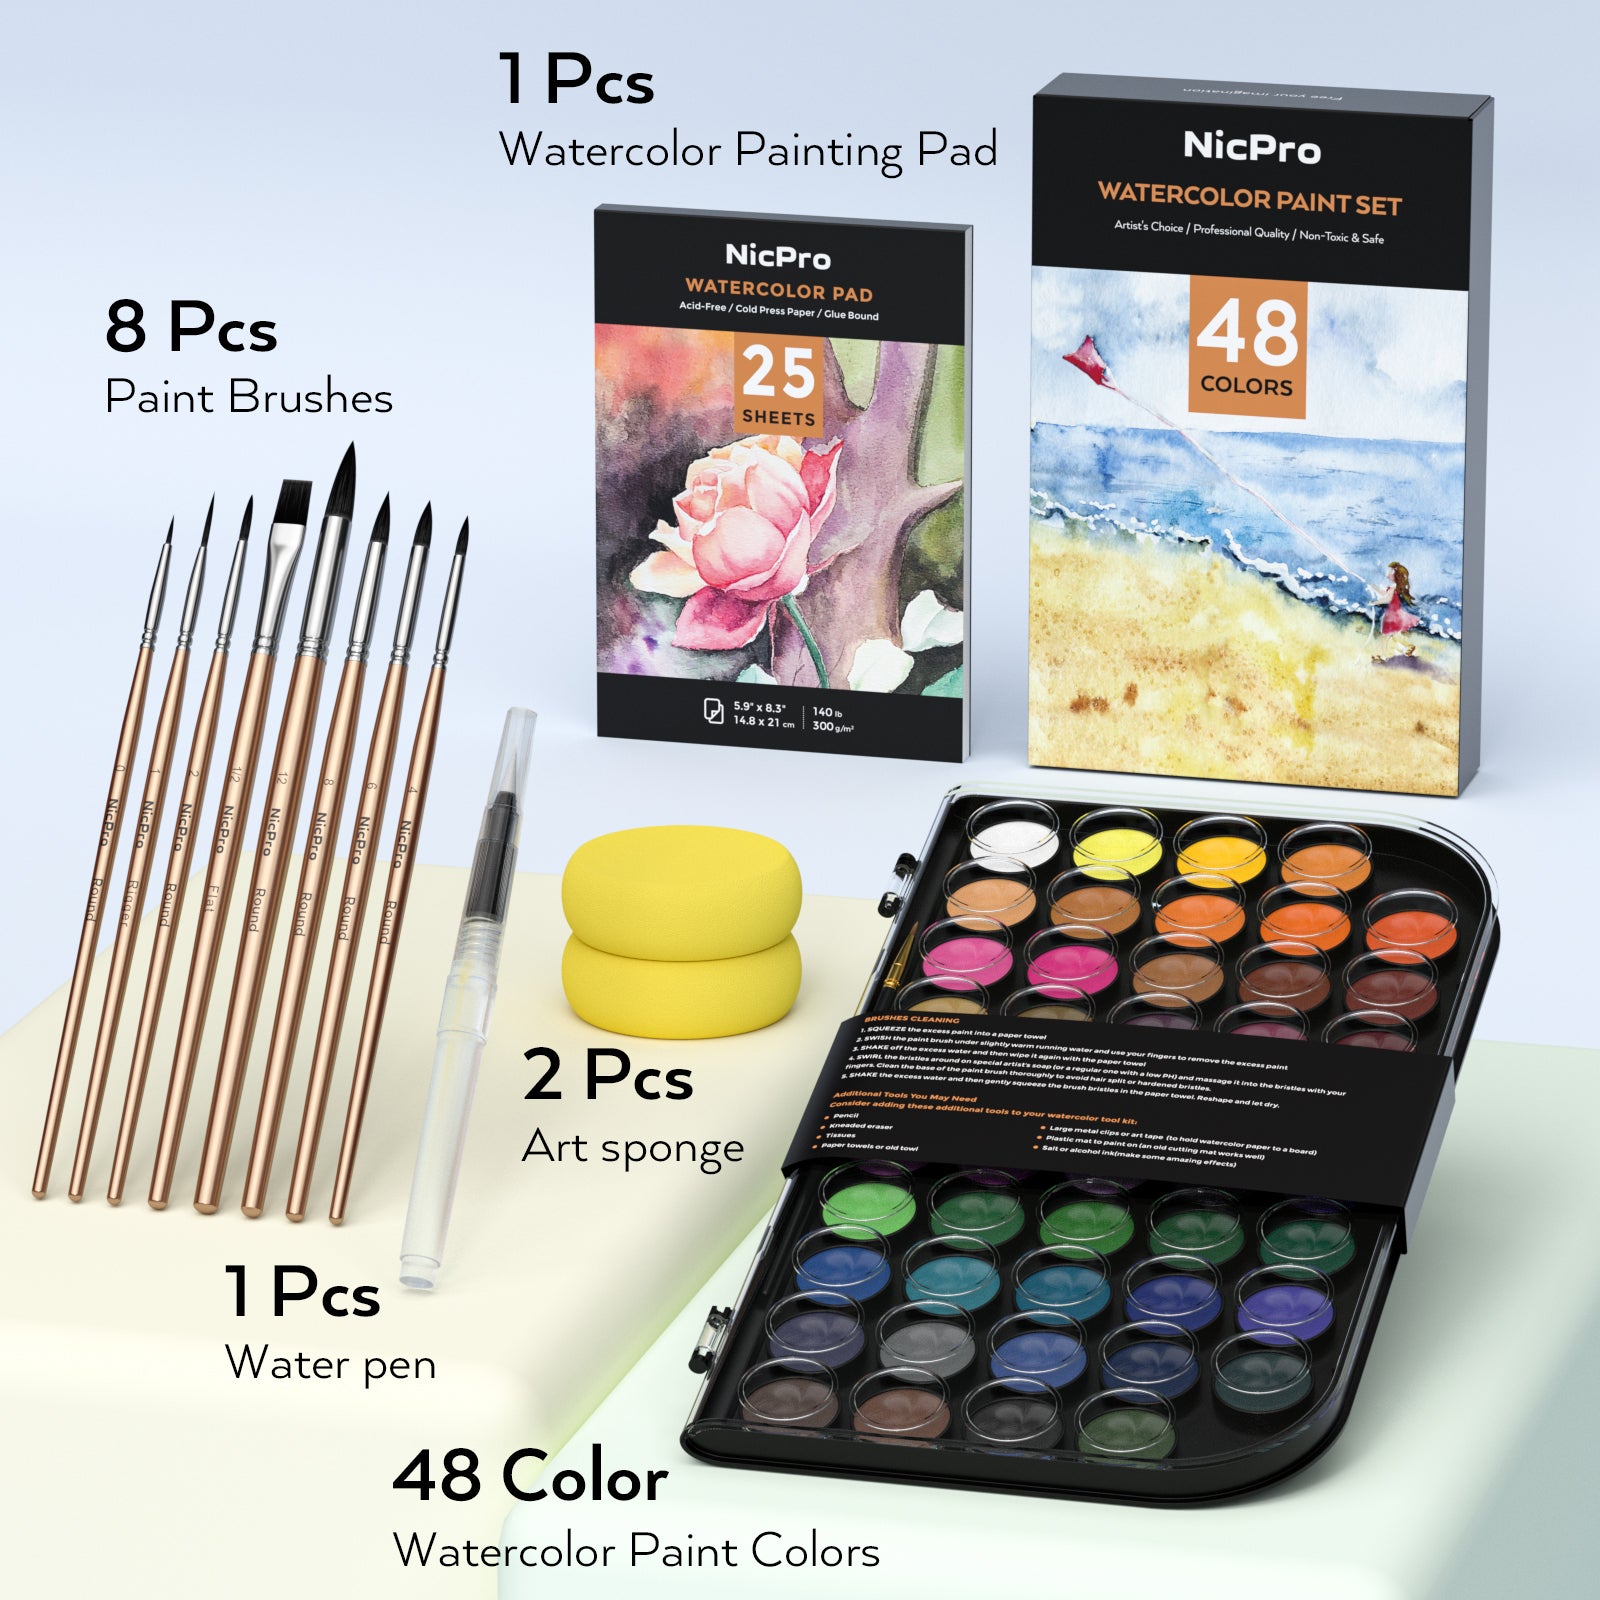 H&B Watercolor Paint Set 50 Colors Professional Art Supplies with Flat Brush Watercolor Brush Pen for Artists Beginners Students Adults Drawing